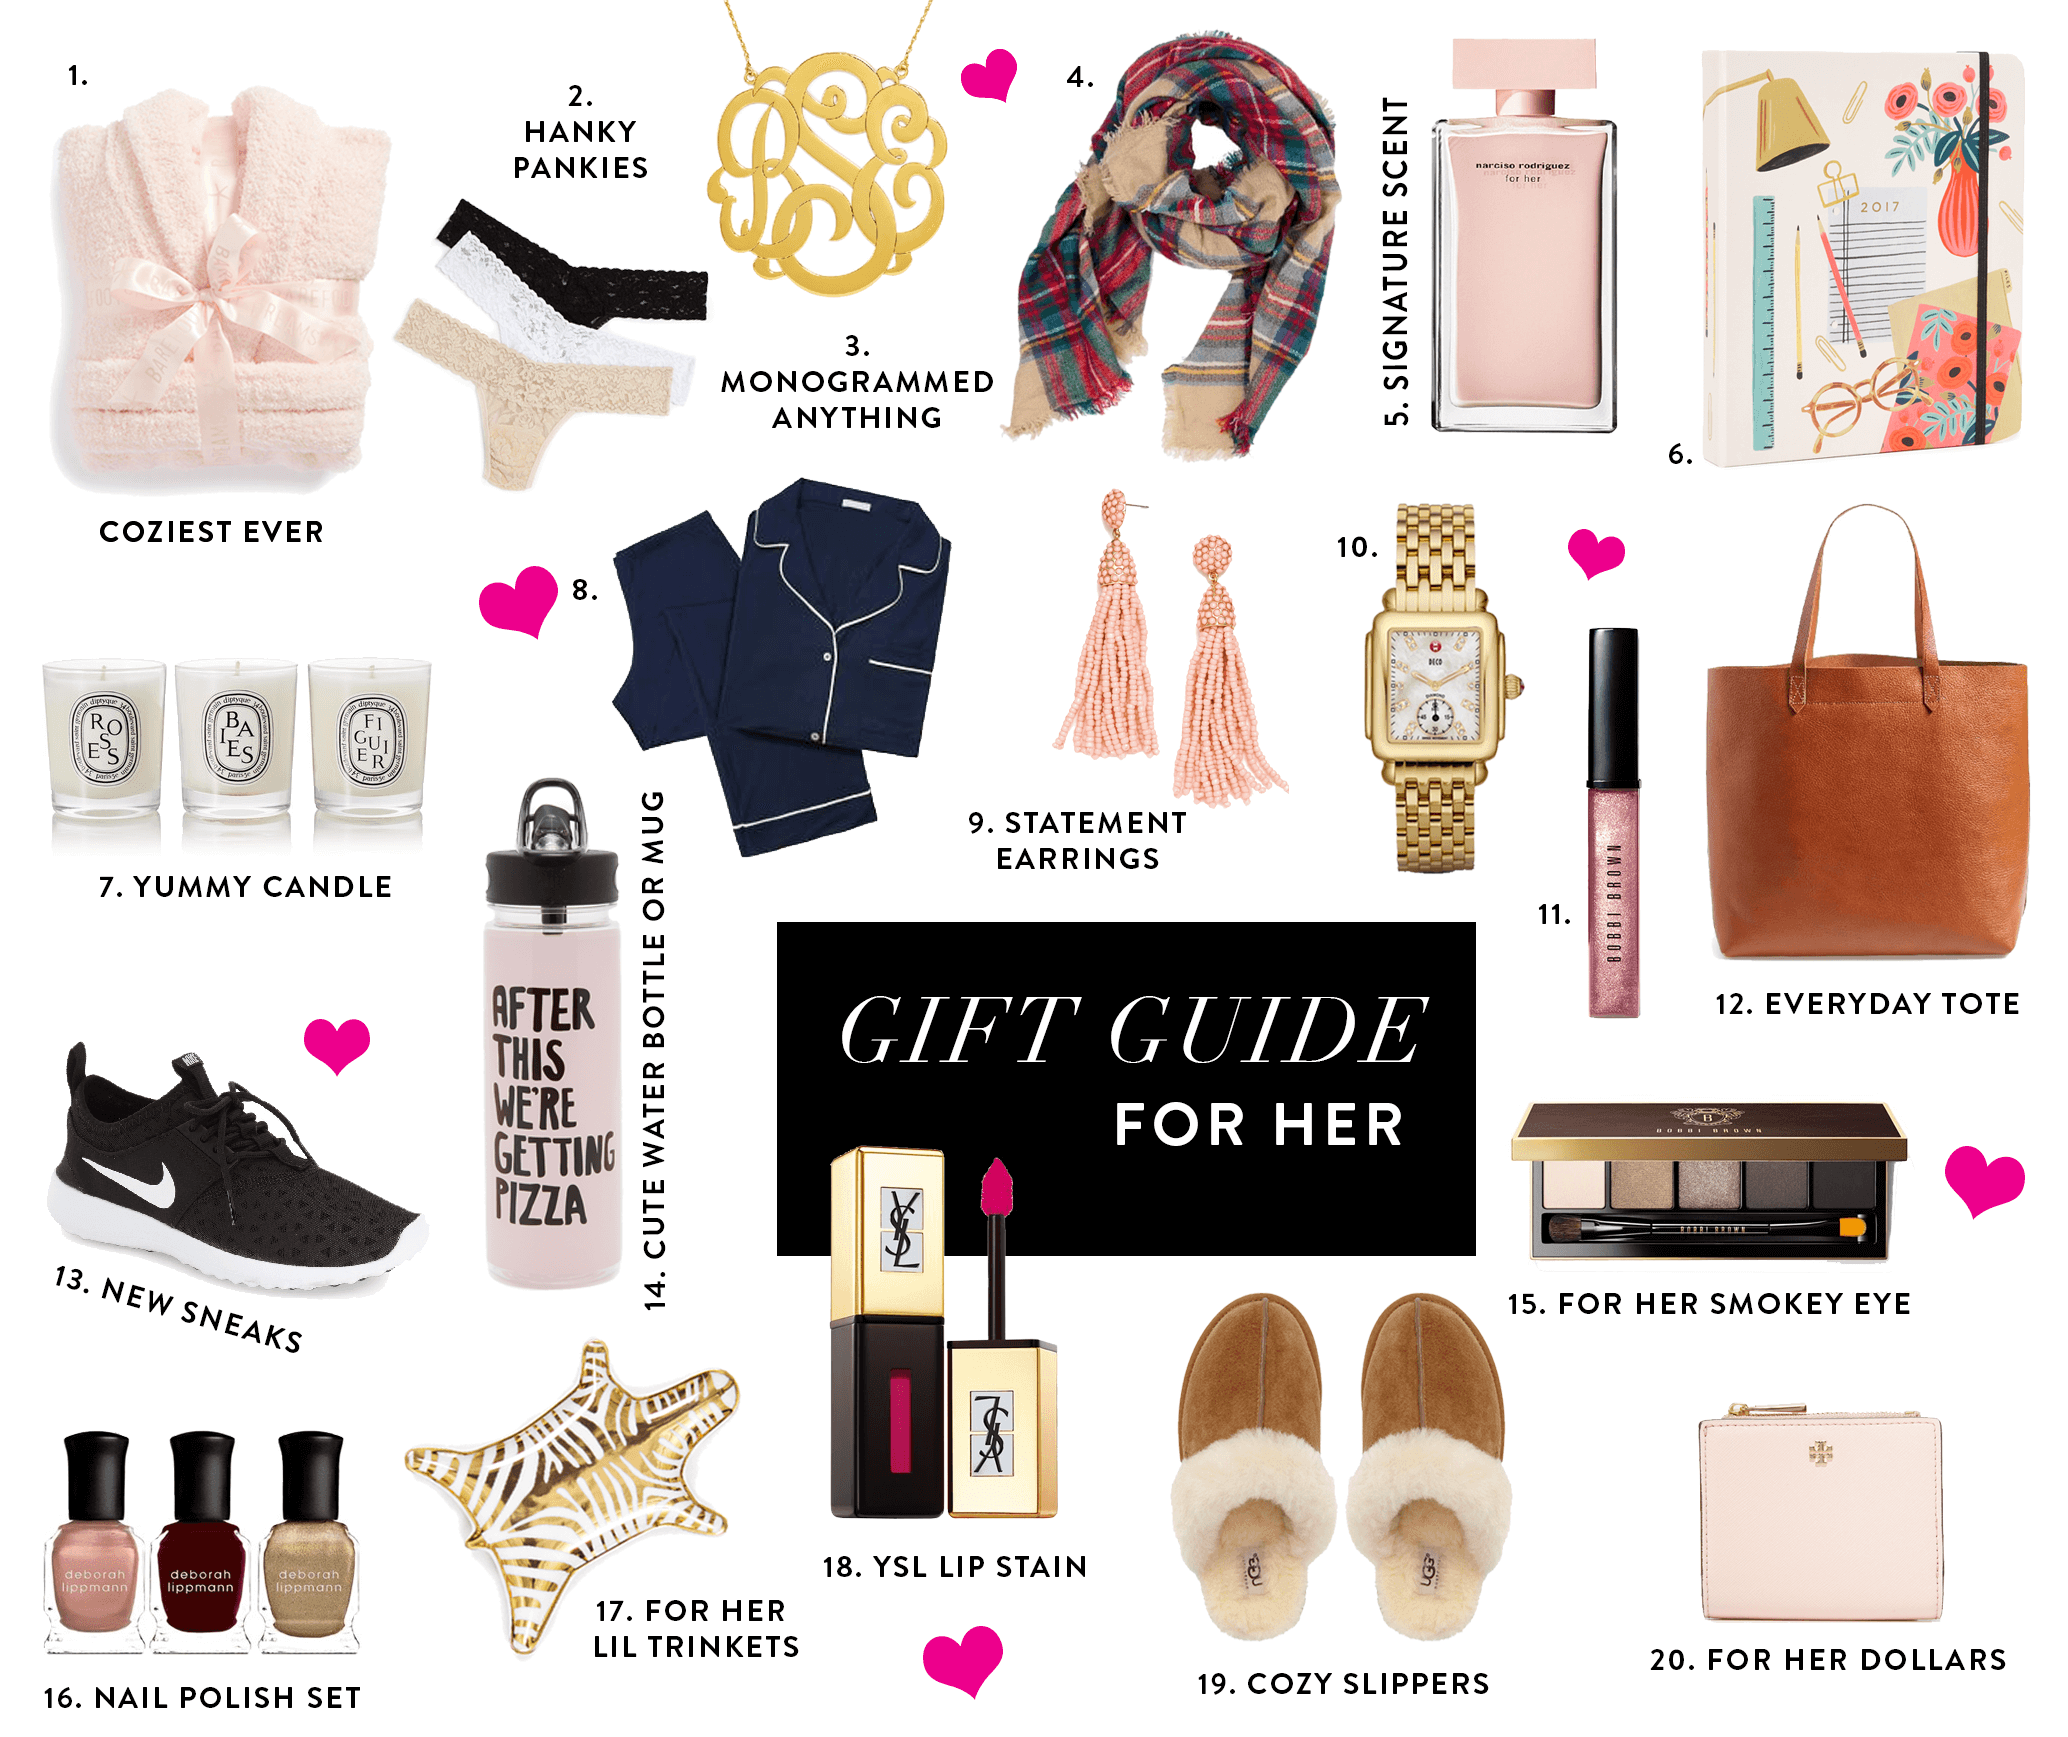 Gift Ideas for Her - Our Women's Gift Guide 